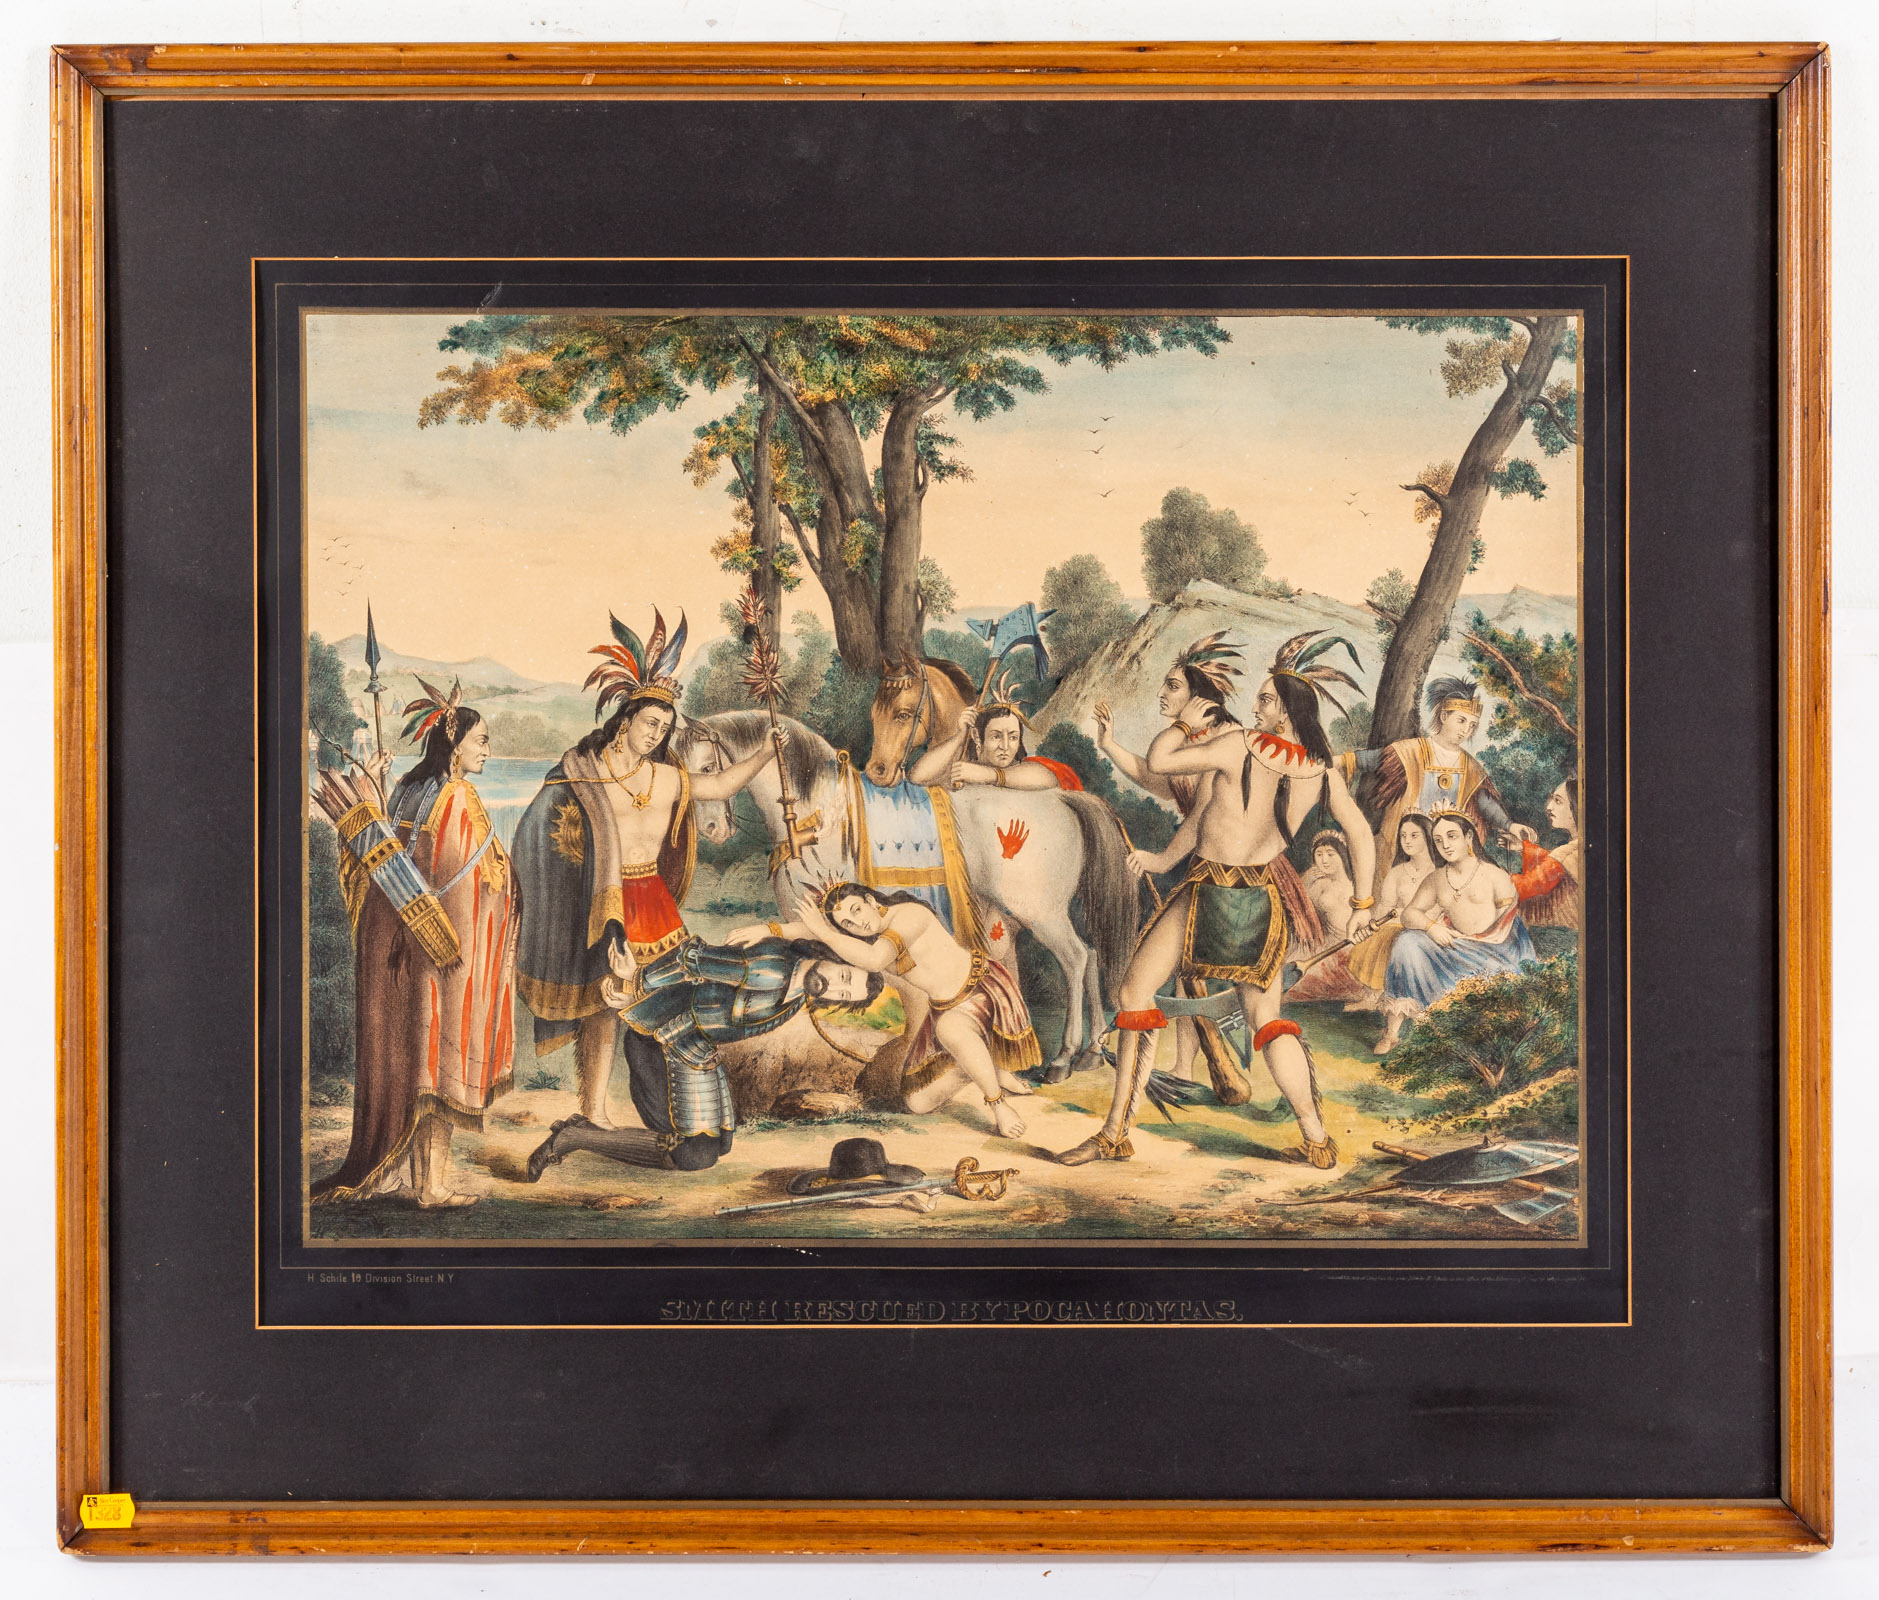 H. SCHULE. "SMITH RESCUED BY POCOHONTAS,"